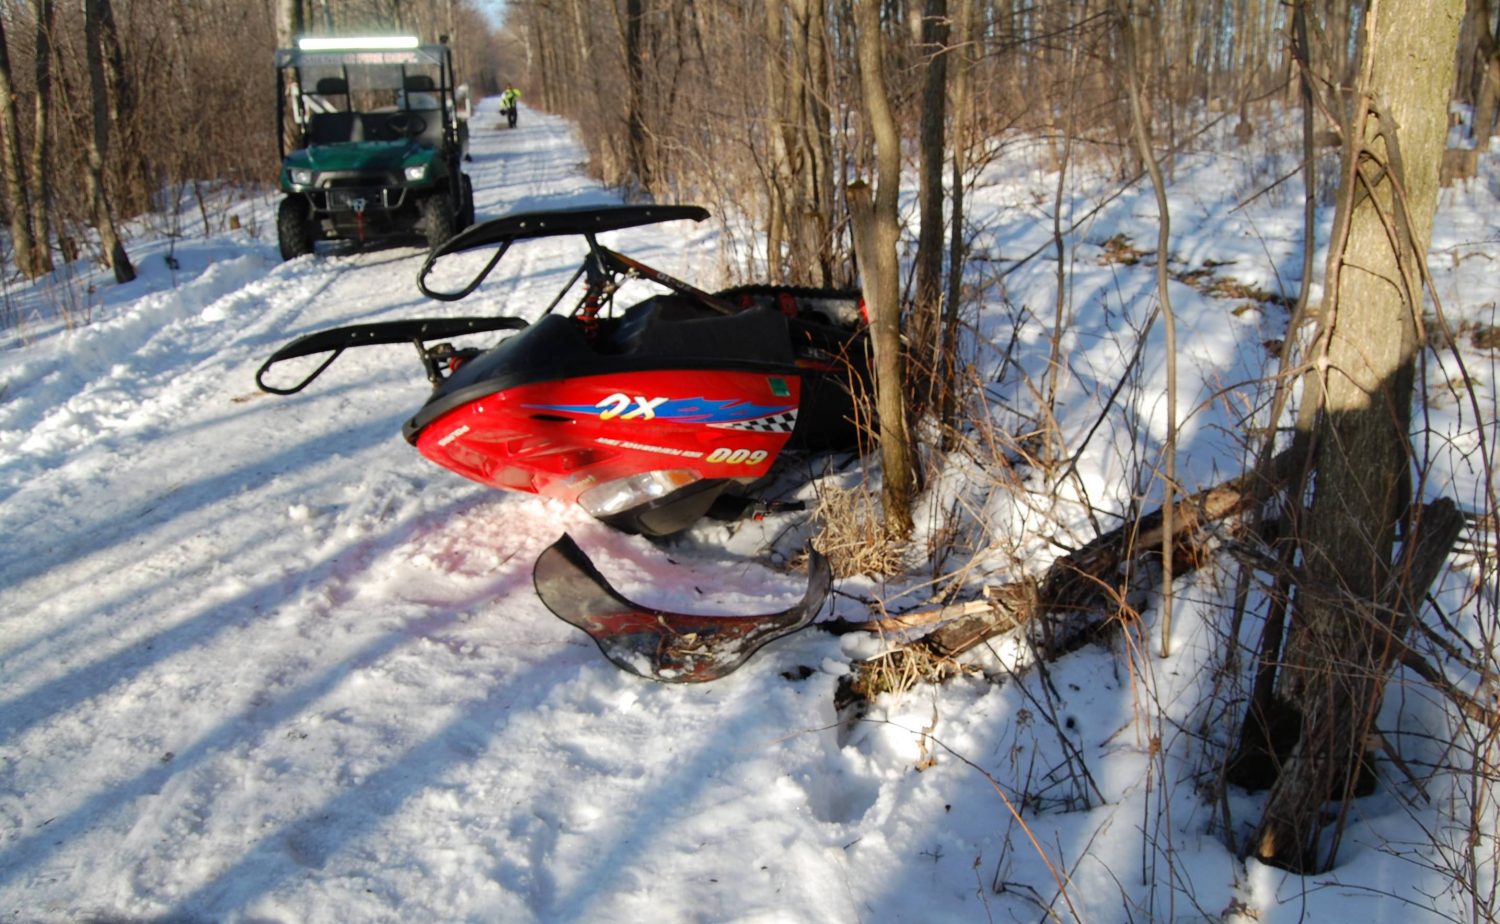 Robert N. Kurz, Loyal, died as a result of injuries sustained in a snowmobile crash in the township of Sherman Feb. 12.